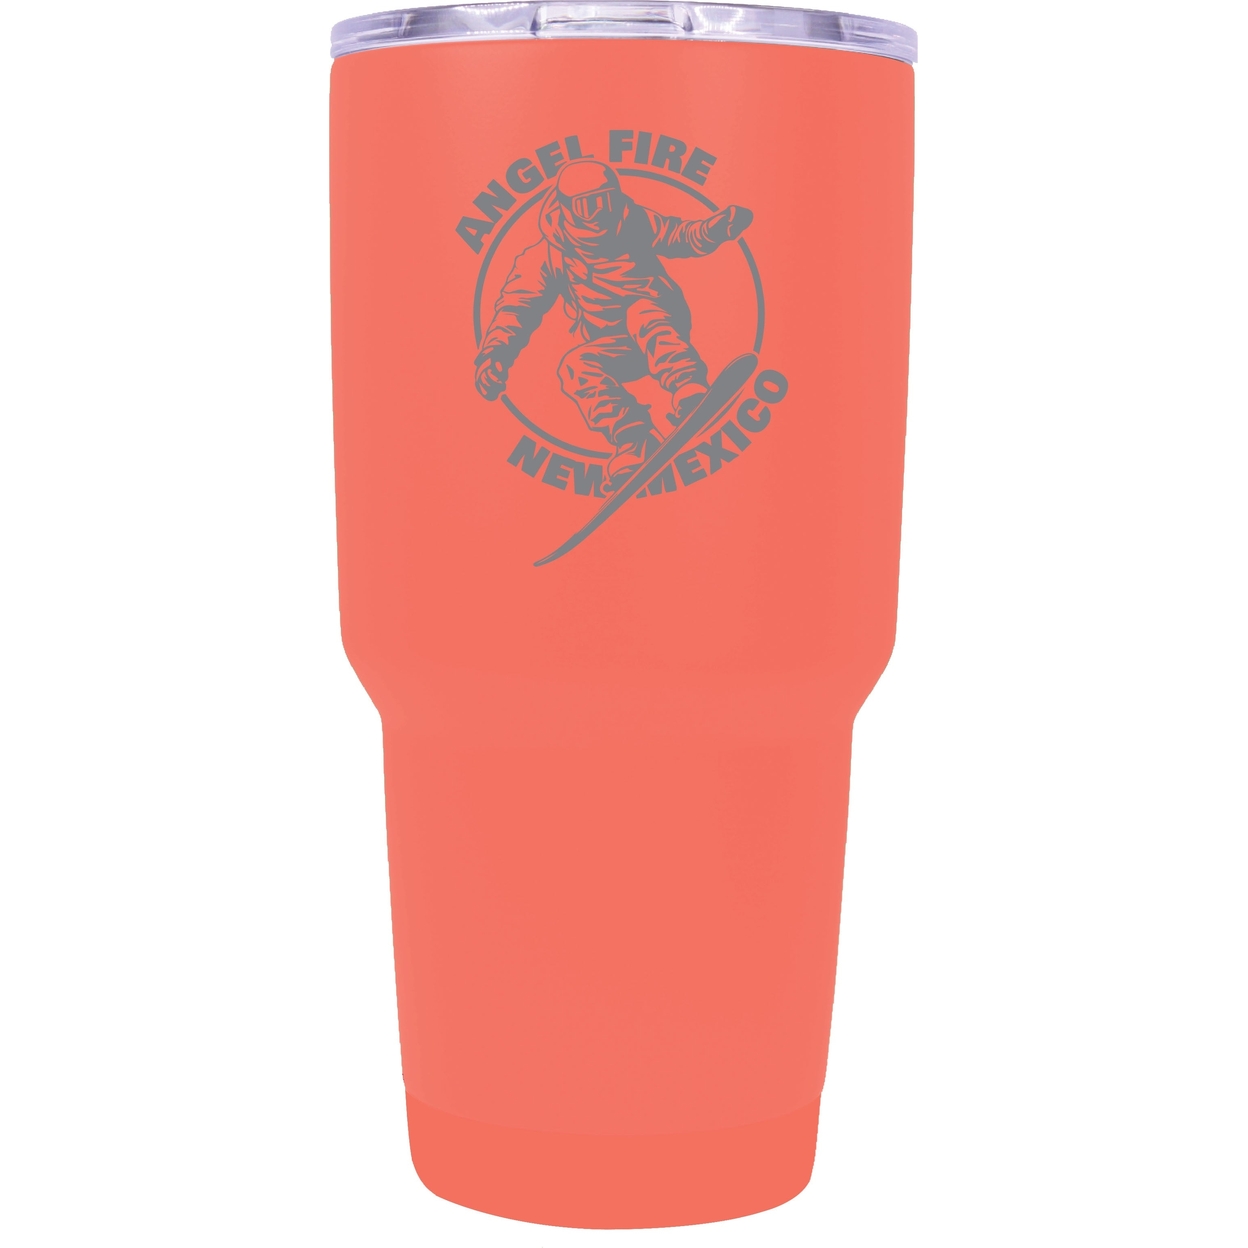 Angel Fire New Mexico Souvenir 24 Oz Engraved Insulated Stainless Steel Tumbler - Coral,,Single Unit